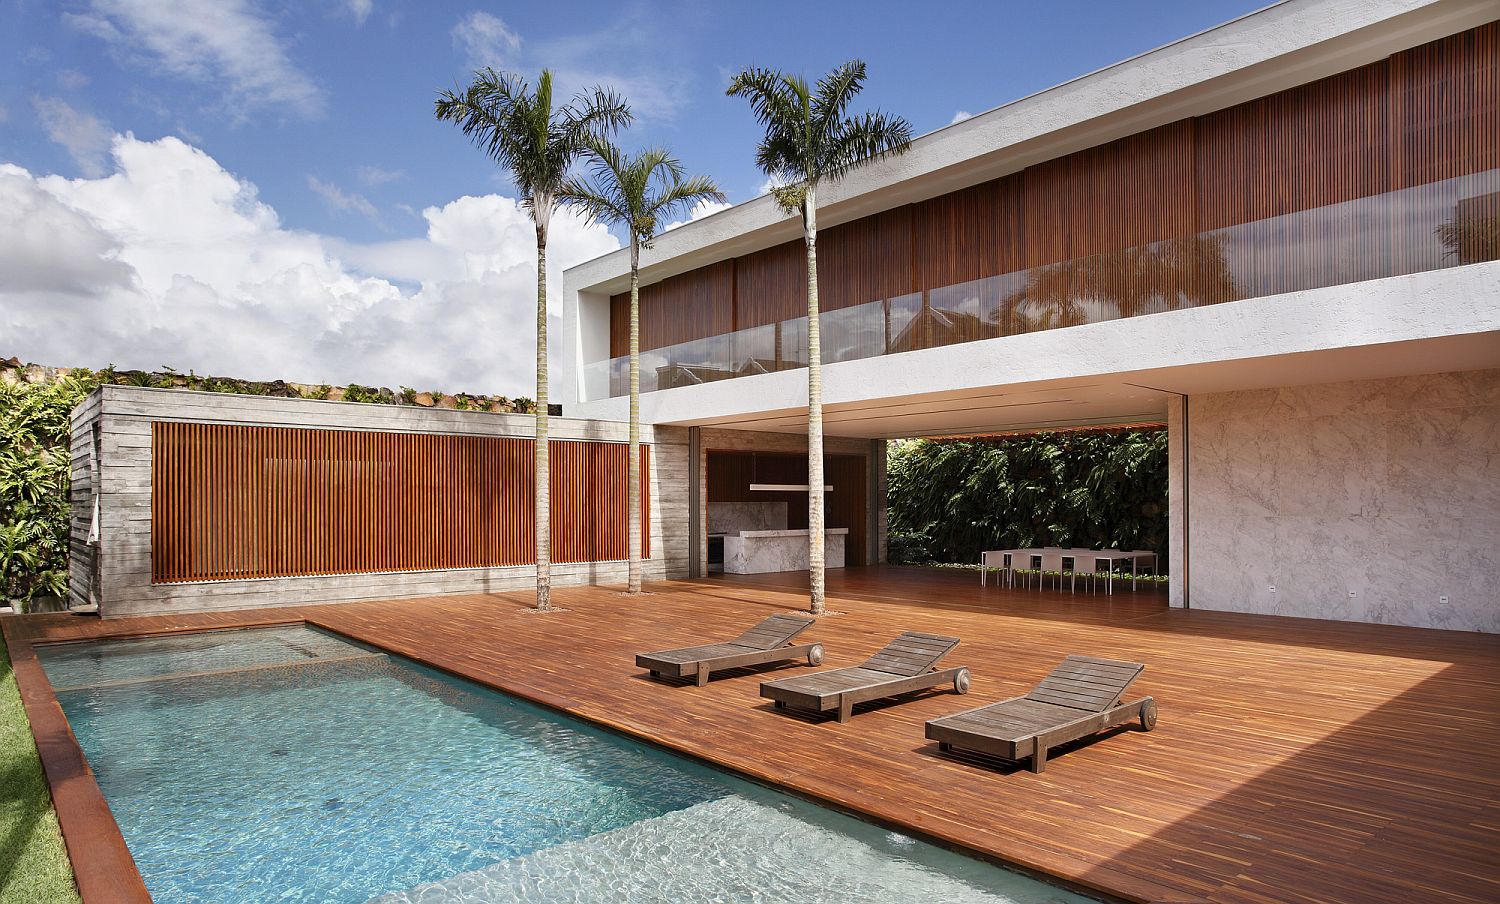 Sun, Shade and a Spectacular Courtyard: Contemporary AN House in Brazil